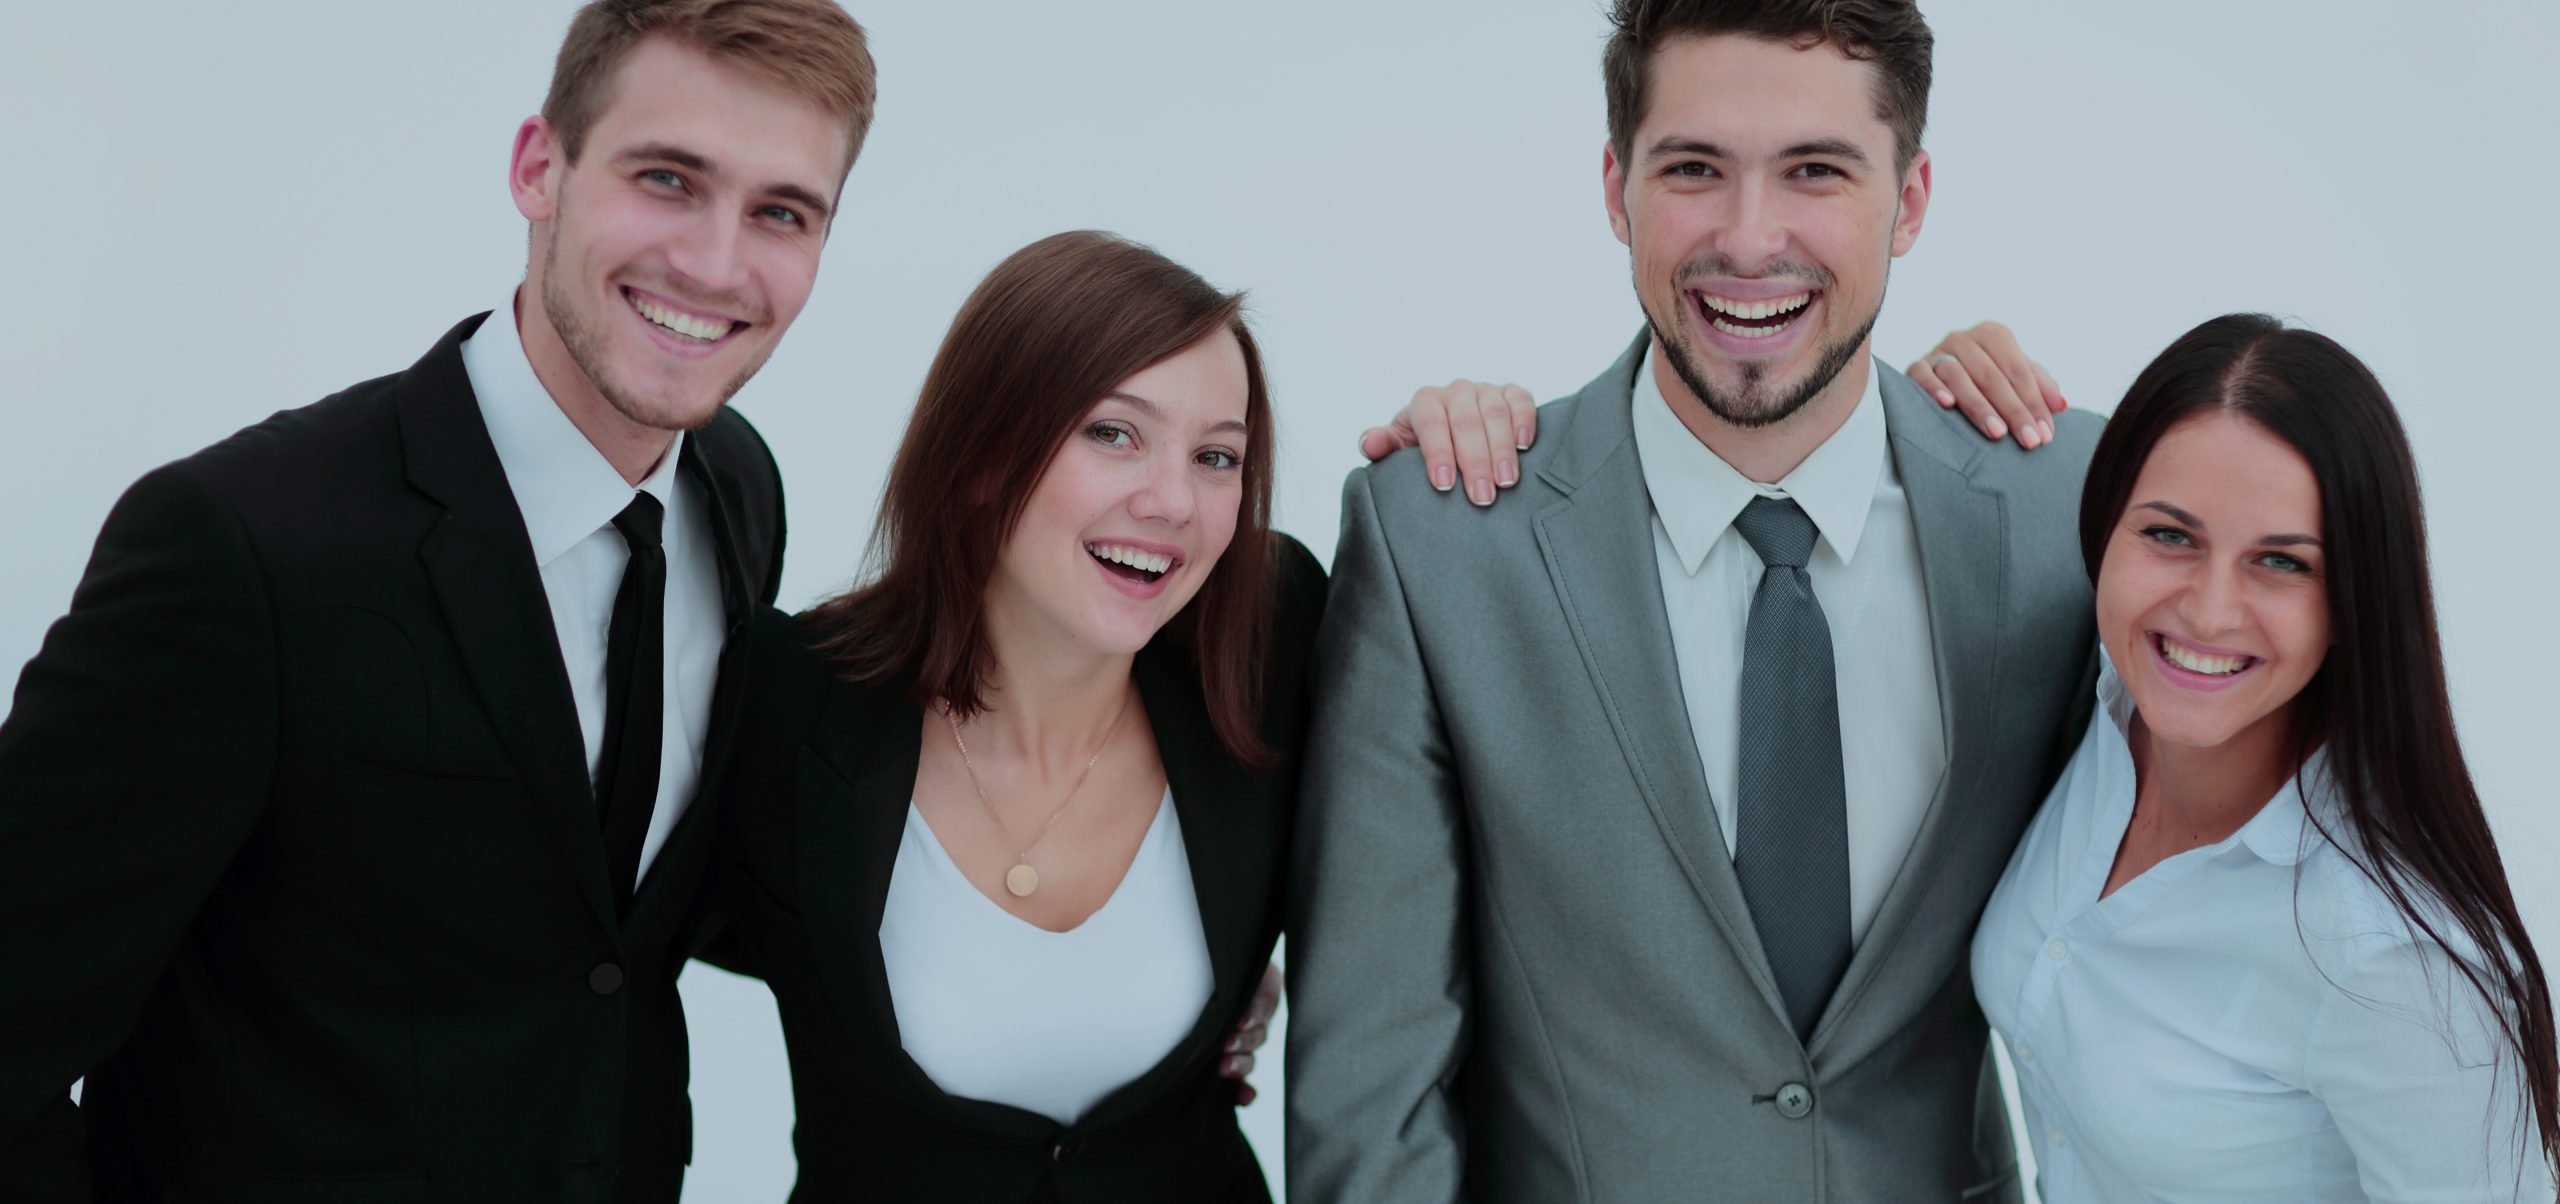 Photo of friendly young businesspeople posing together and smiling.